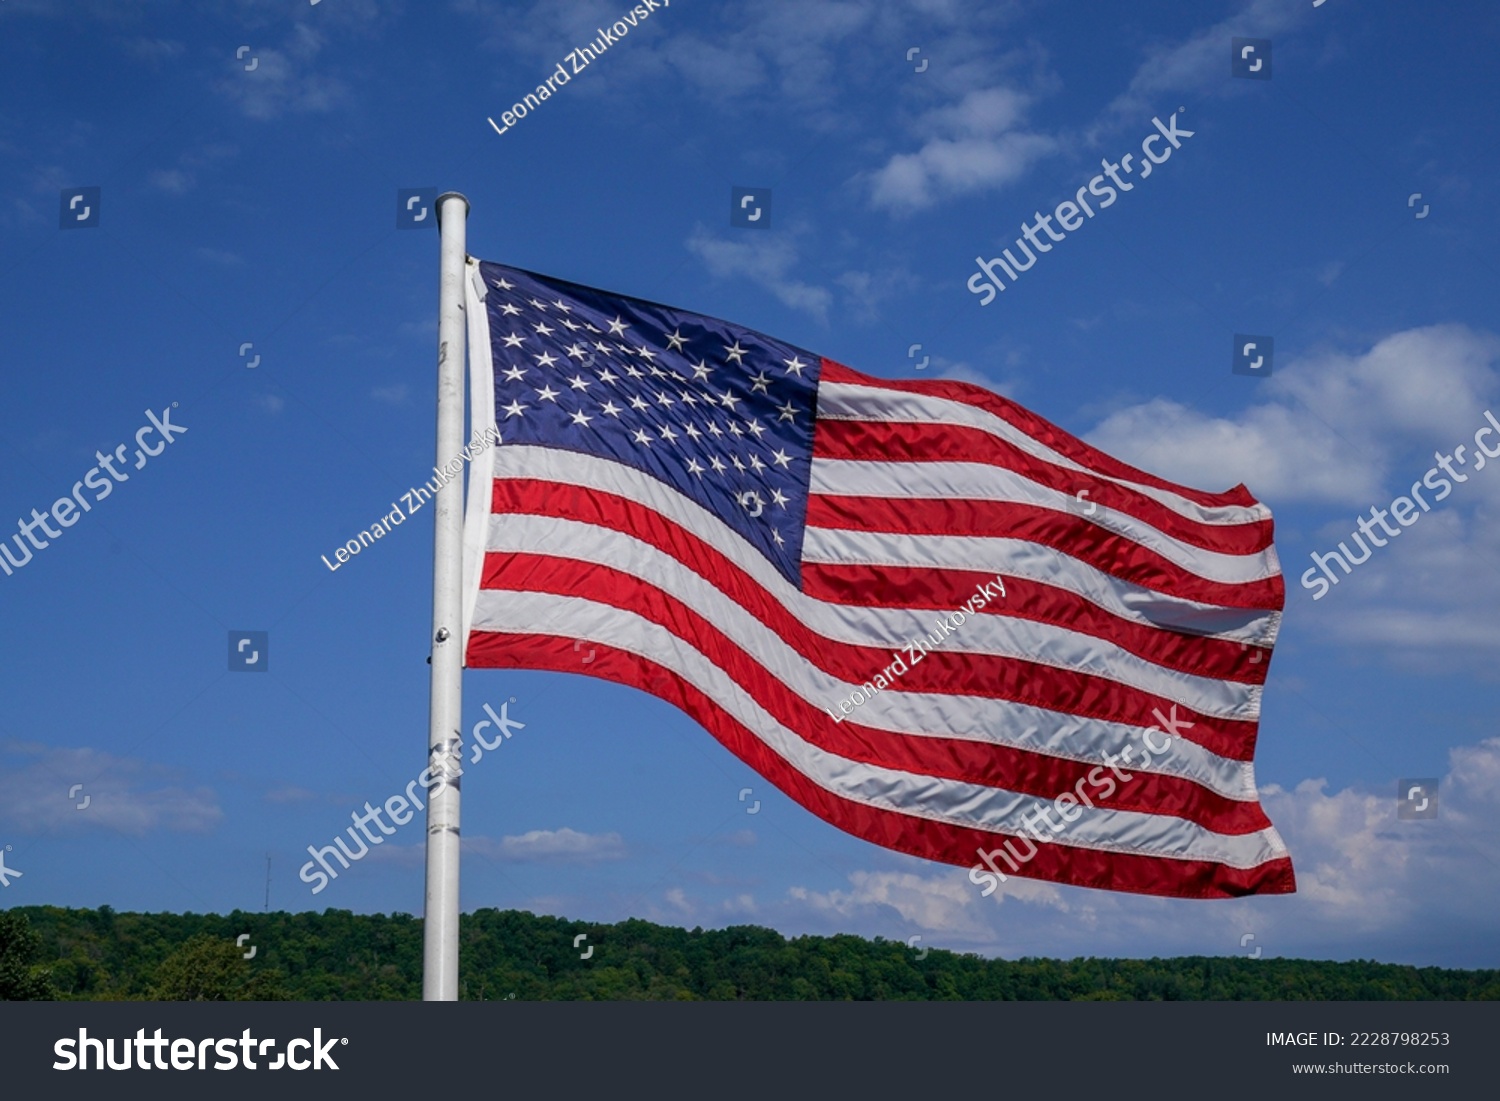 The American Flag in the wind #2228798253